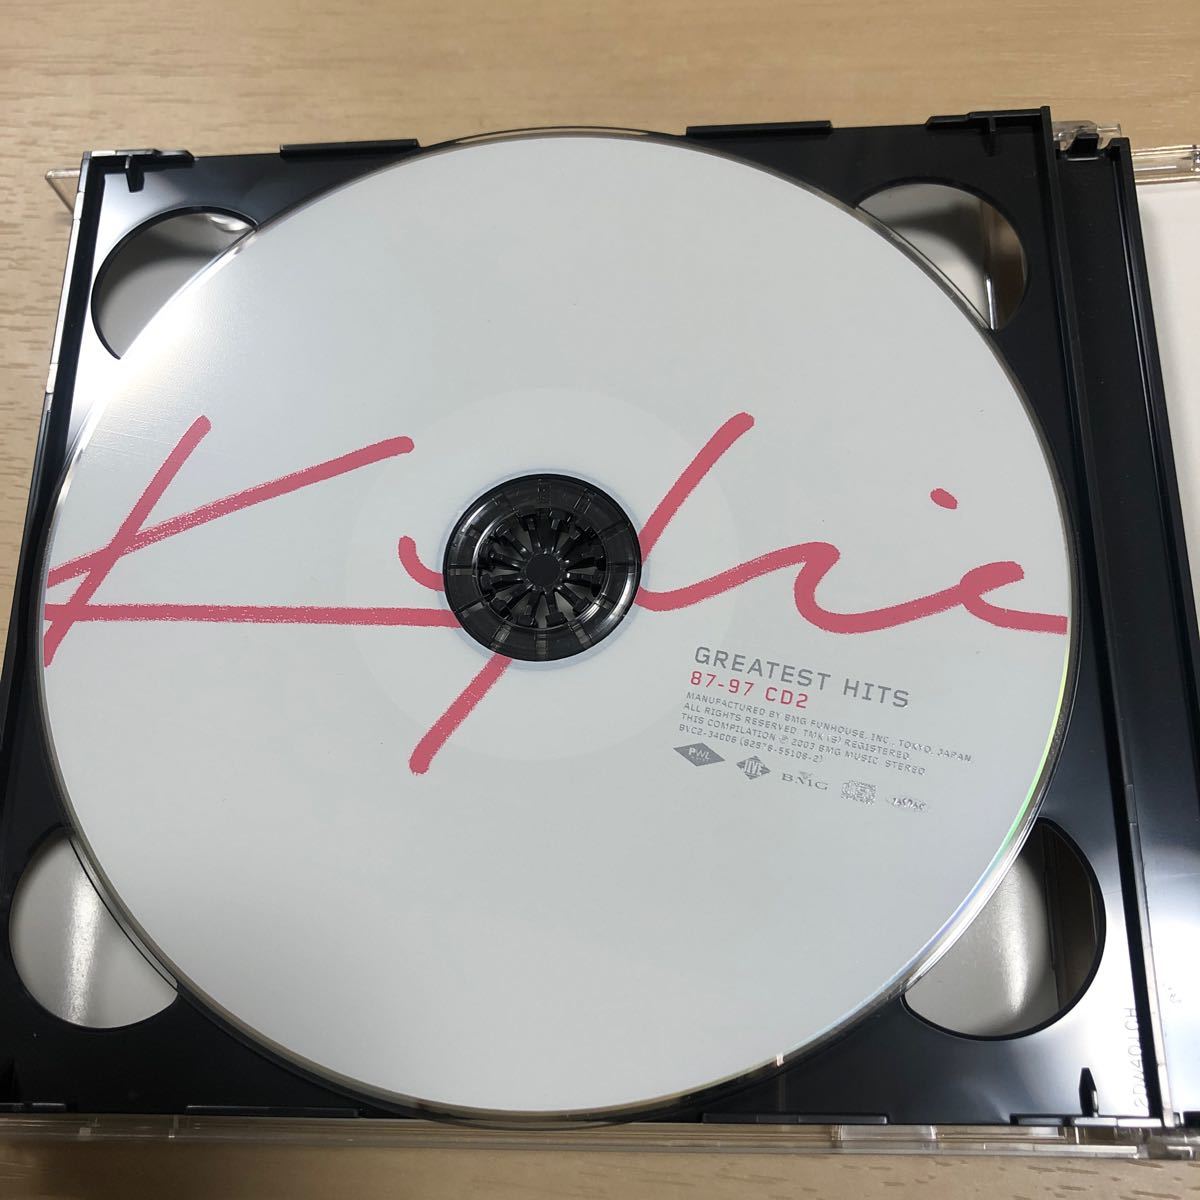 Kylie Minogue Greatest Hits 87-97